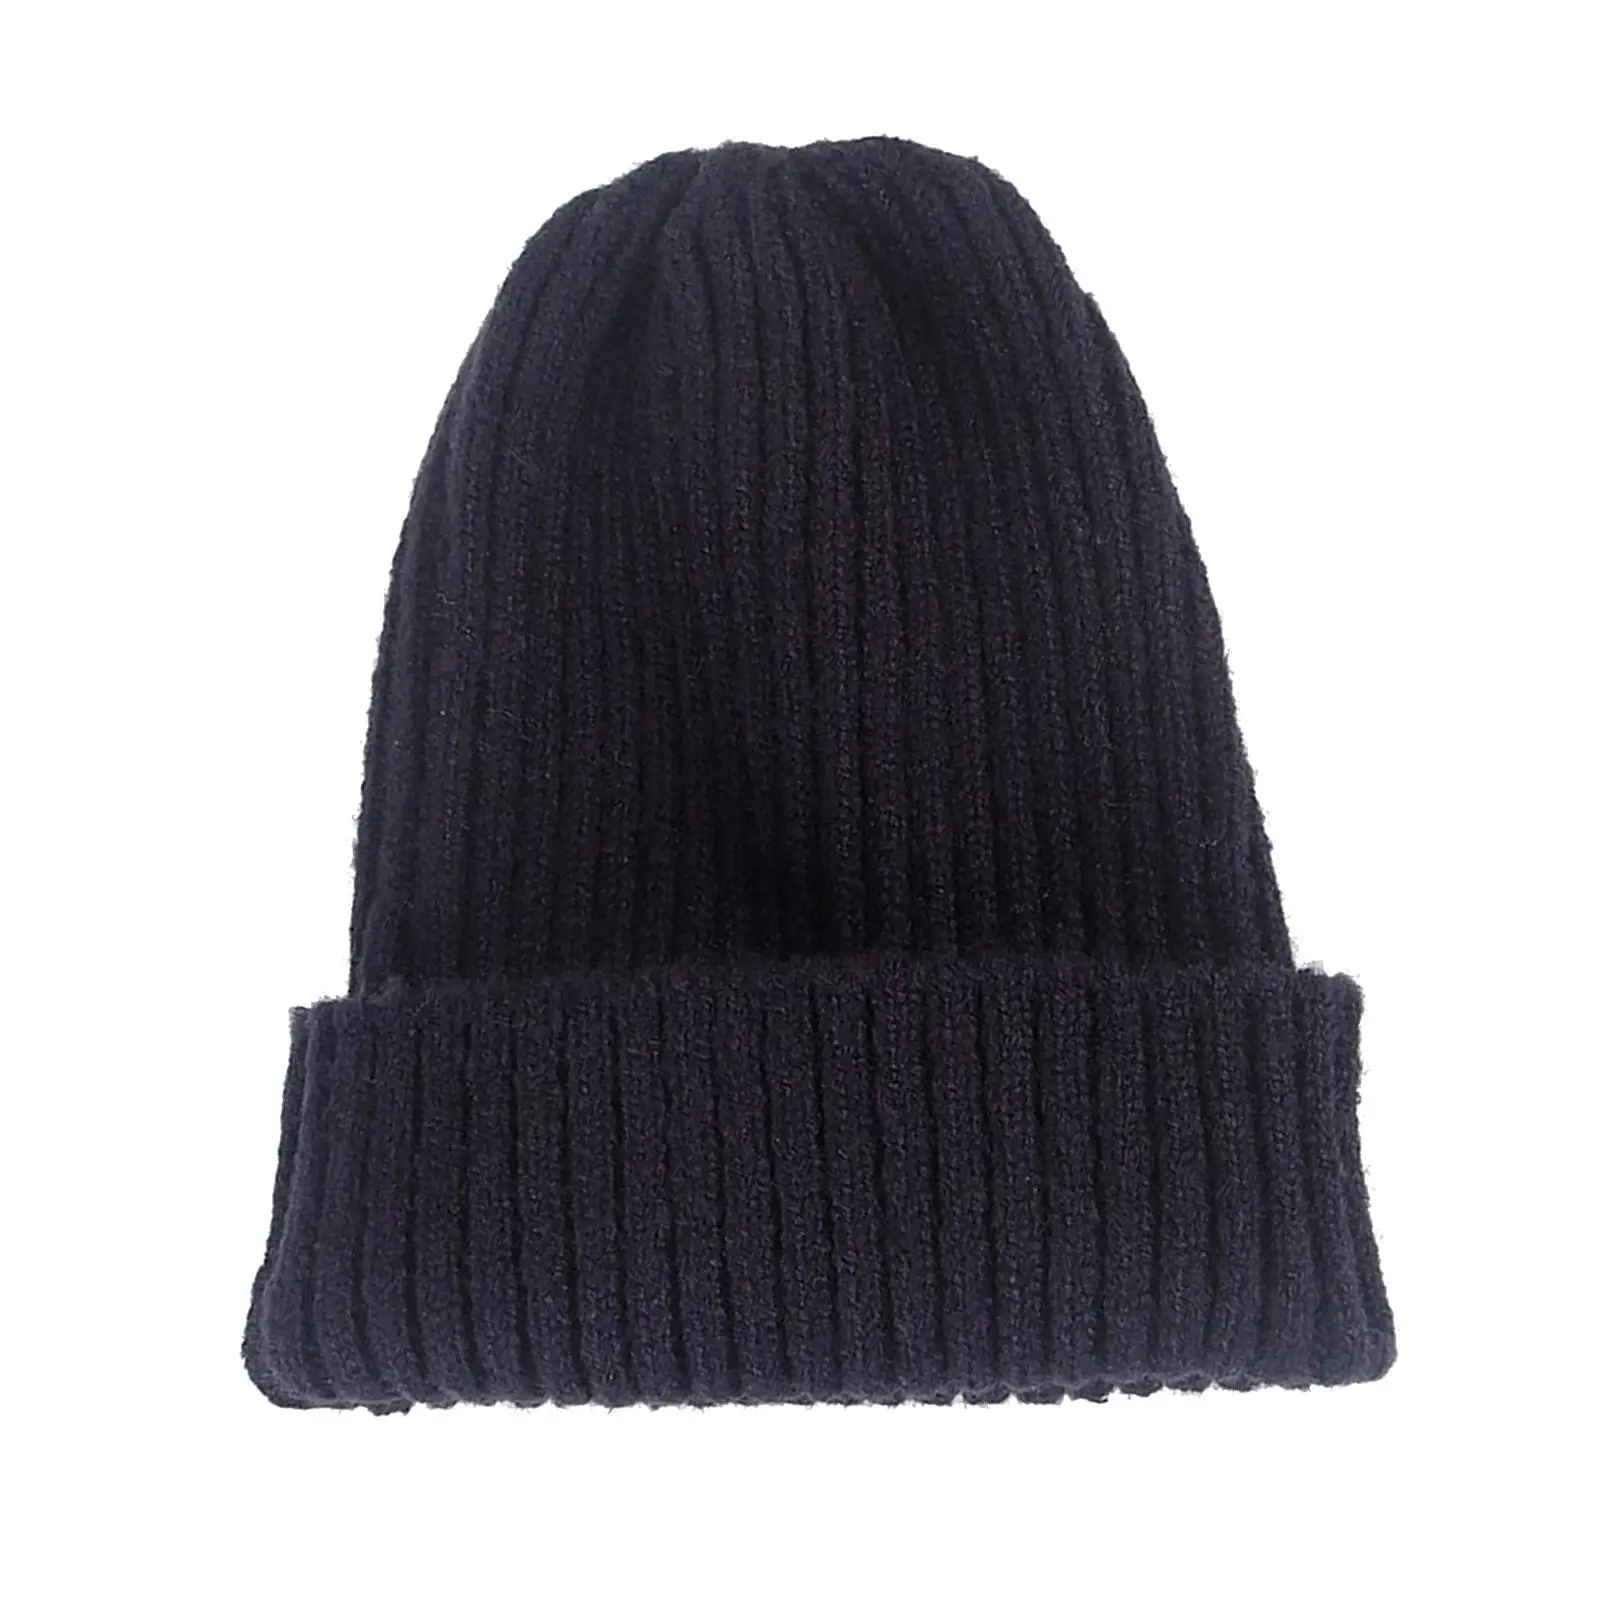 

Knitted Winter Hat Outdoor Ski Hat Fashion Thick A Size Beanie Warm for Winter Activities Cold Weather Hiking Women and Men